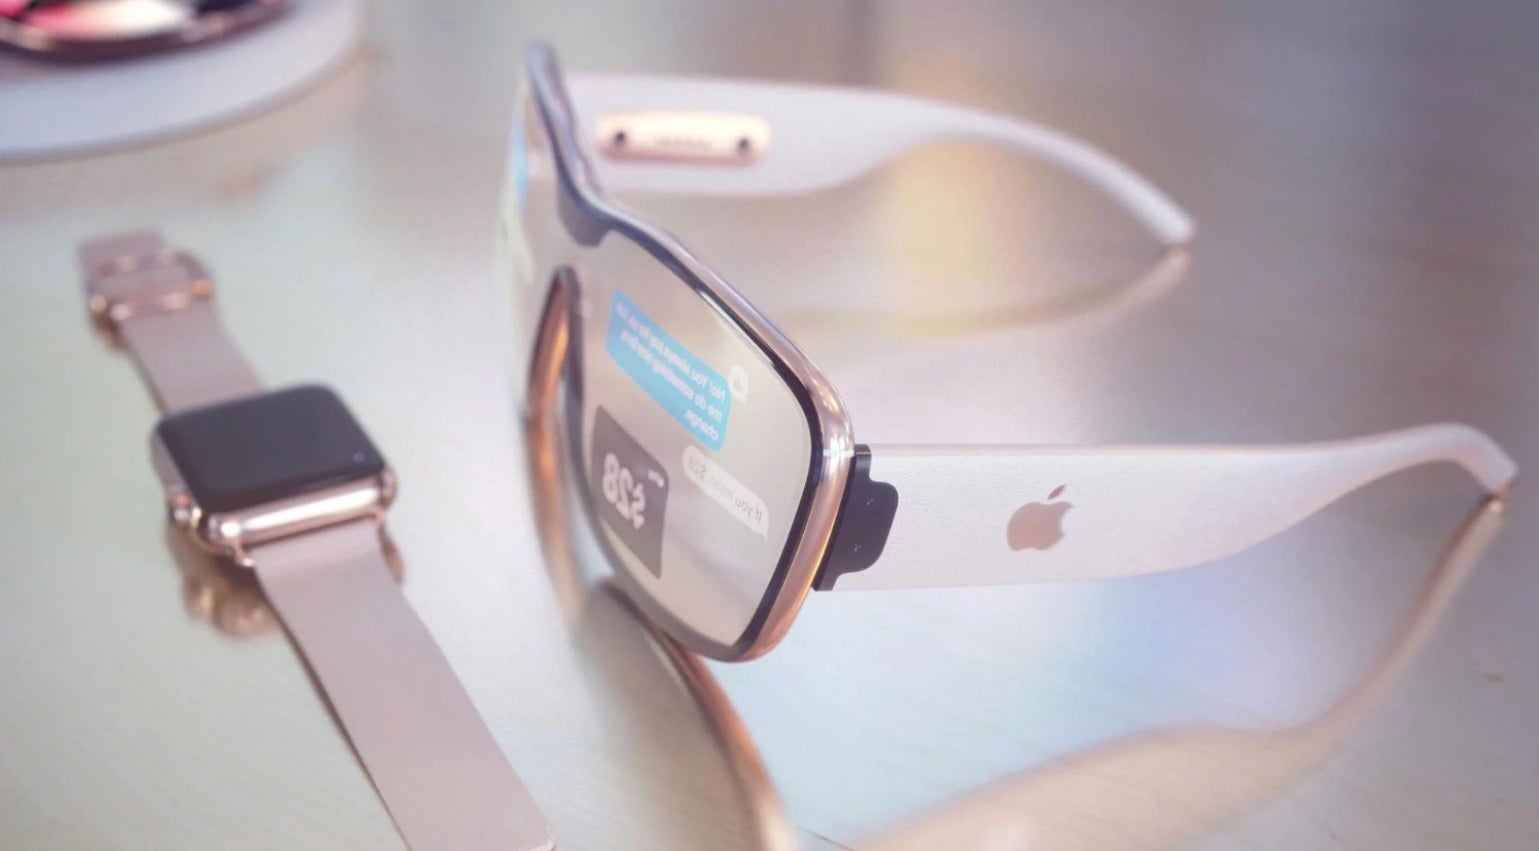 Apple Glasses concept by Martin Hajek for iDrop News - Apple Glasses release date, price, features and news